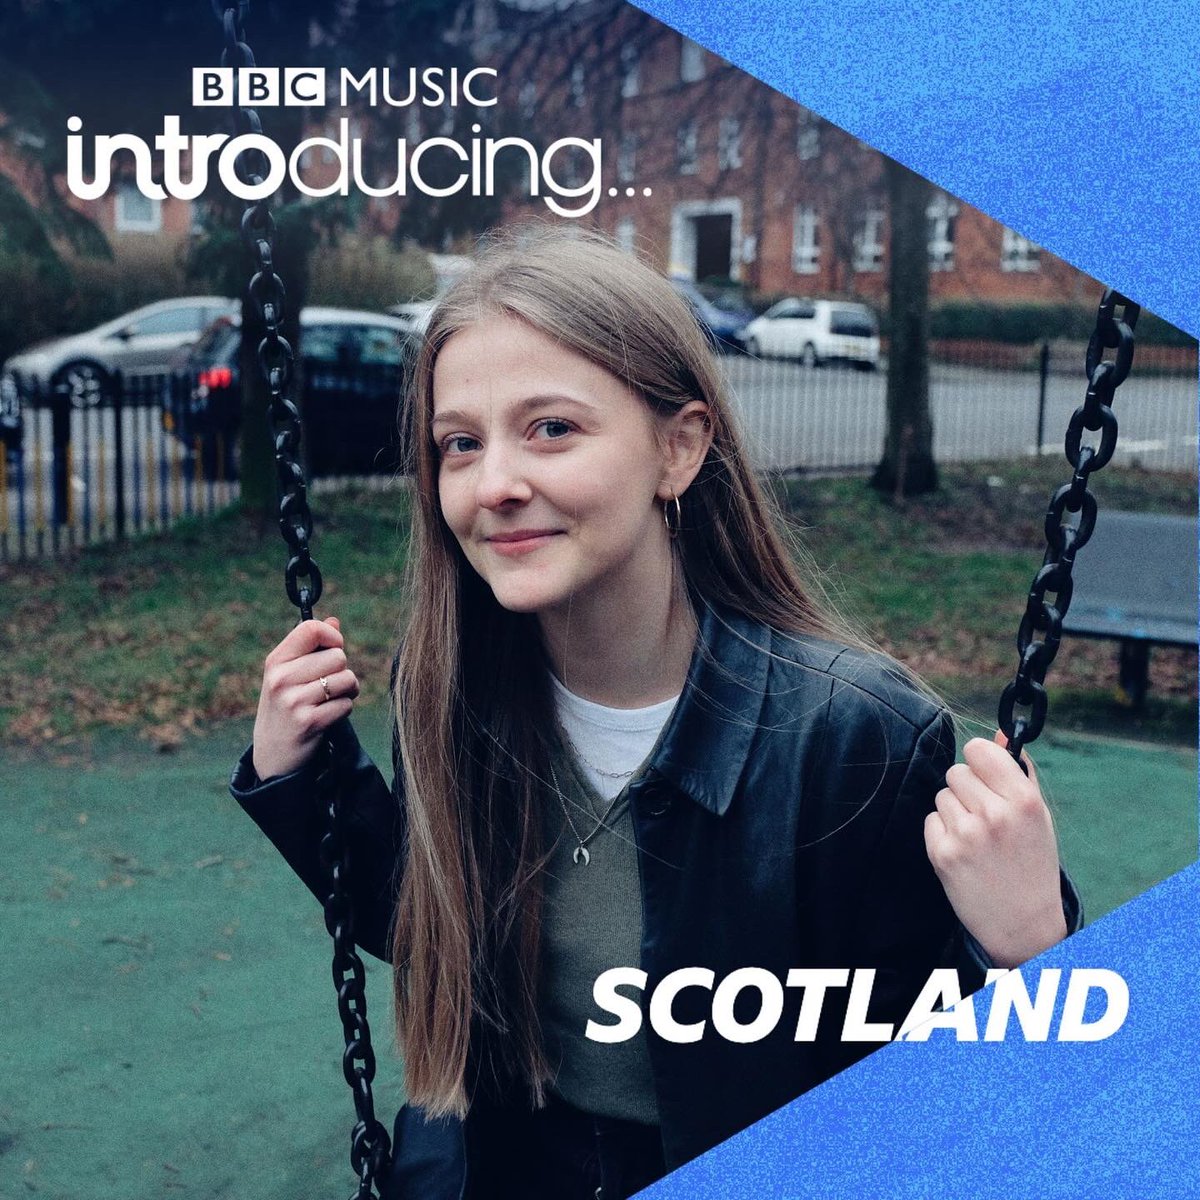 THIS FRIDAY!!! So so excited to share that I’ll be doing a little live session on @bbcintroducing / @BBCScotland on Friday between 8-10pm with the band!!! Can’t waitttt!! 🫶🫶